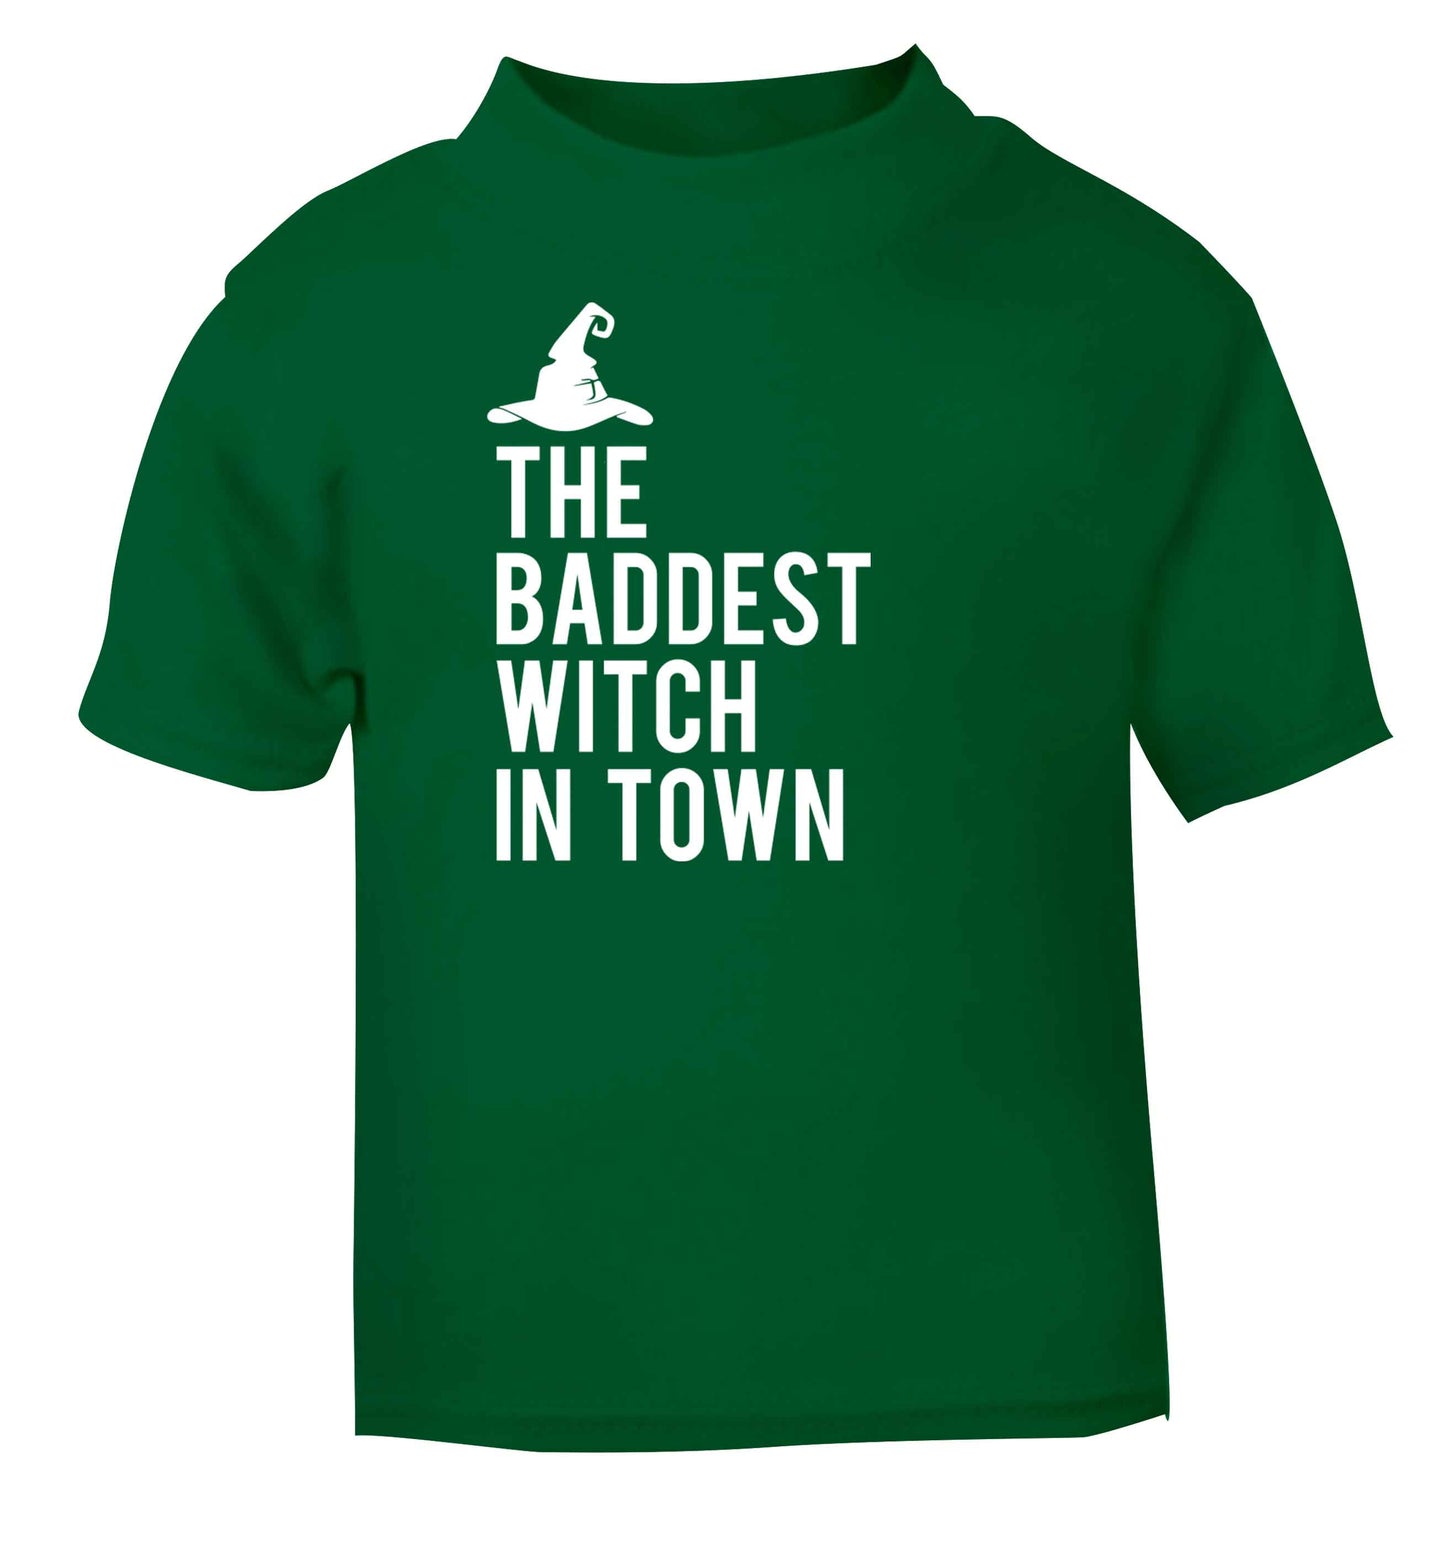 Badest witch in town green baby toddler Tshirt 2 Years